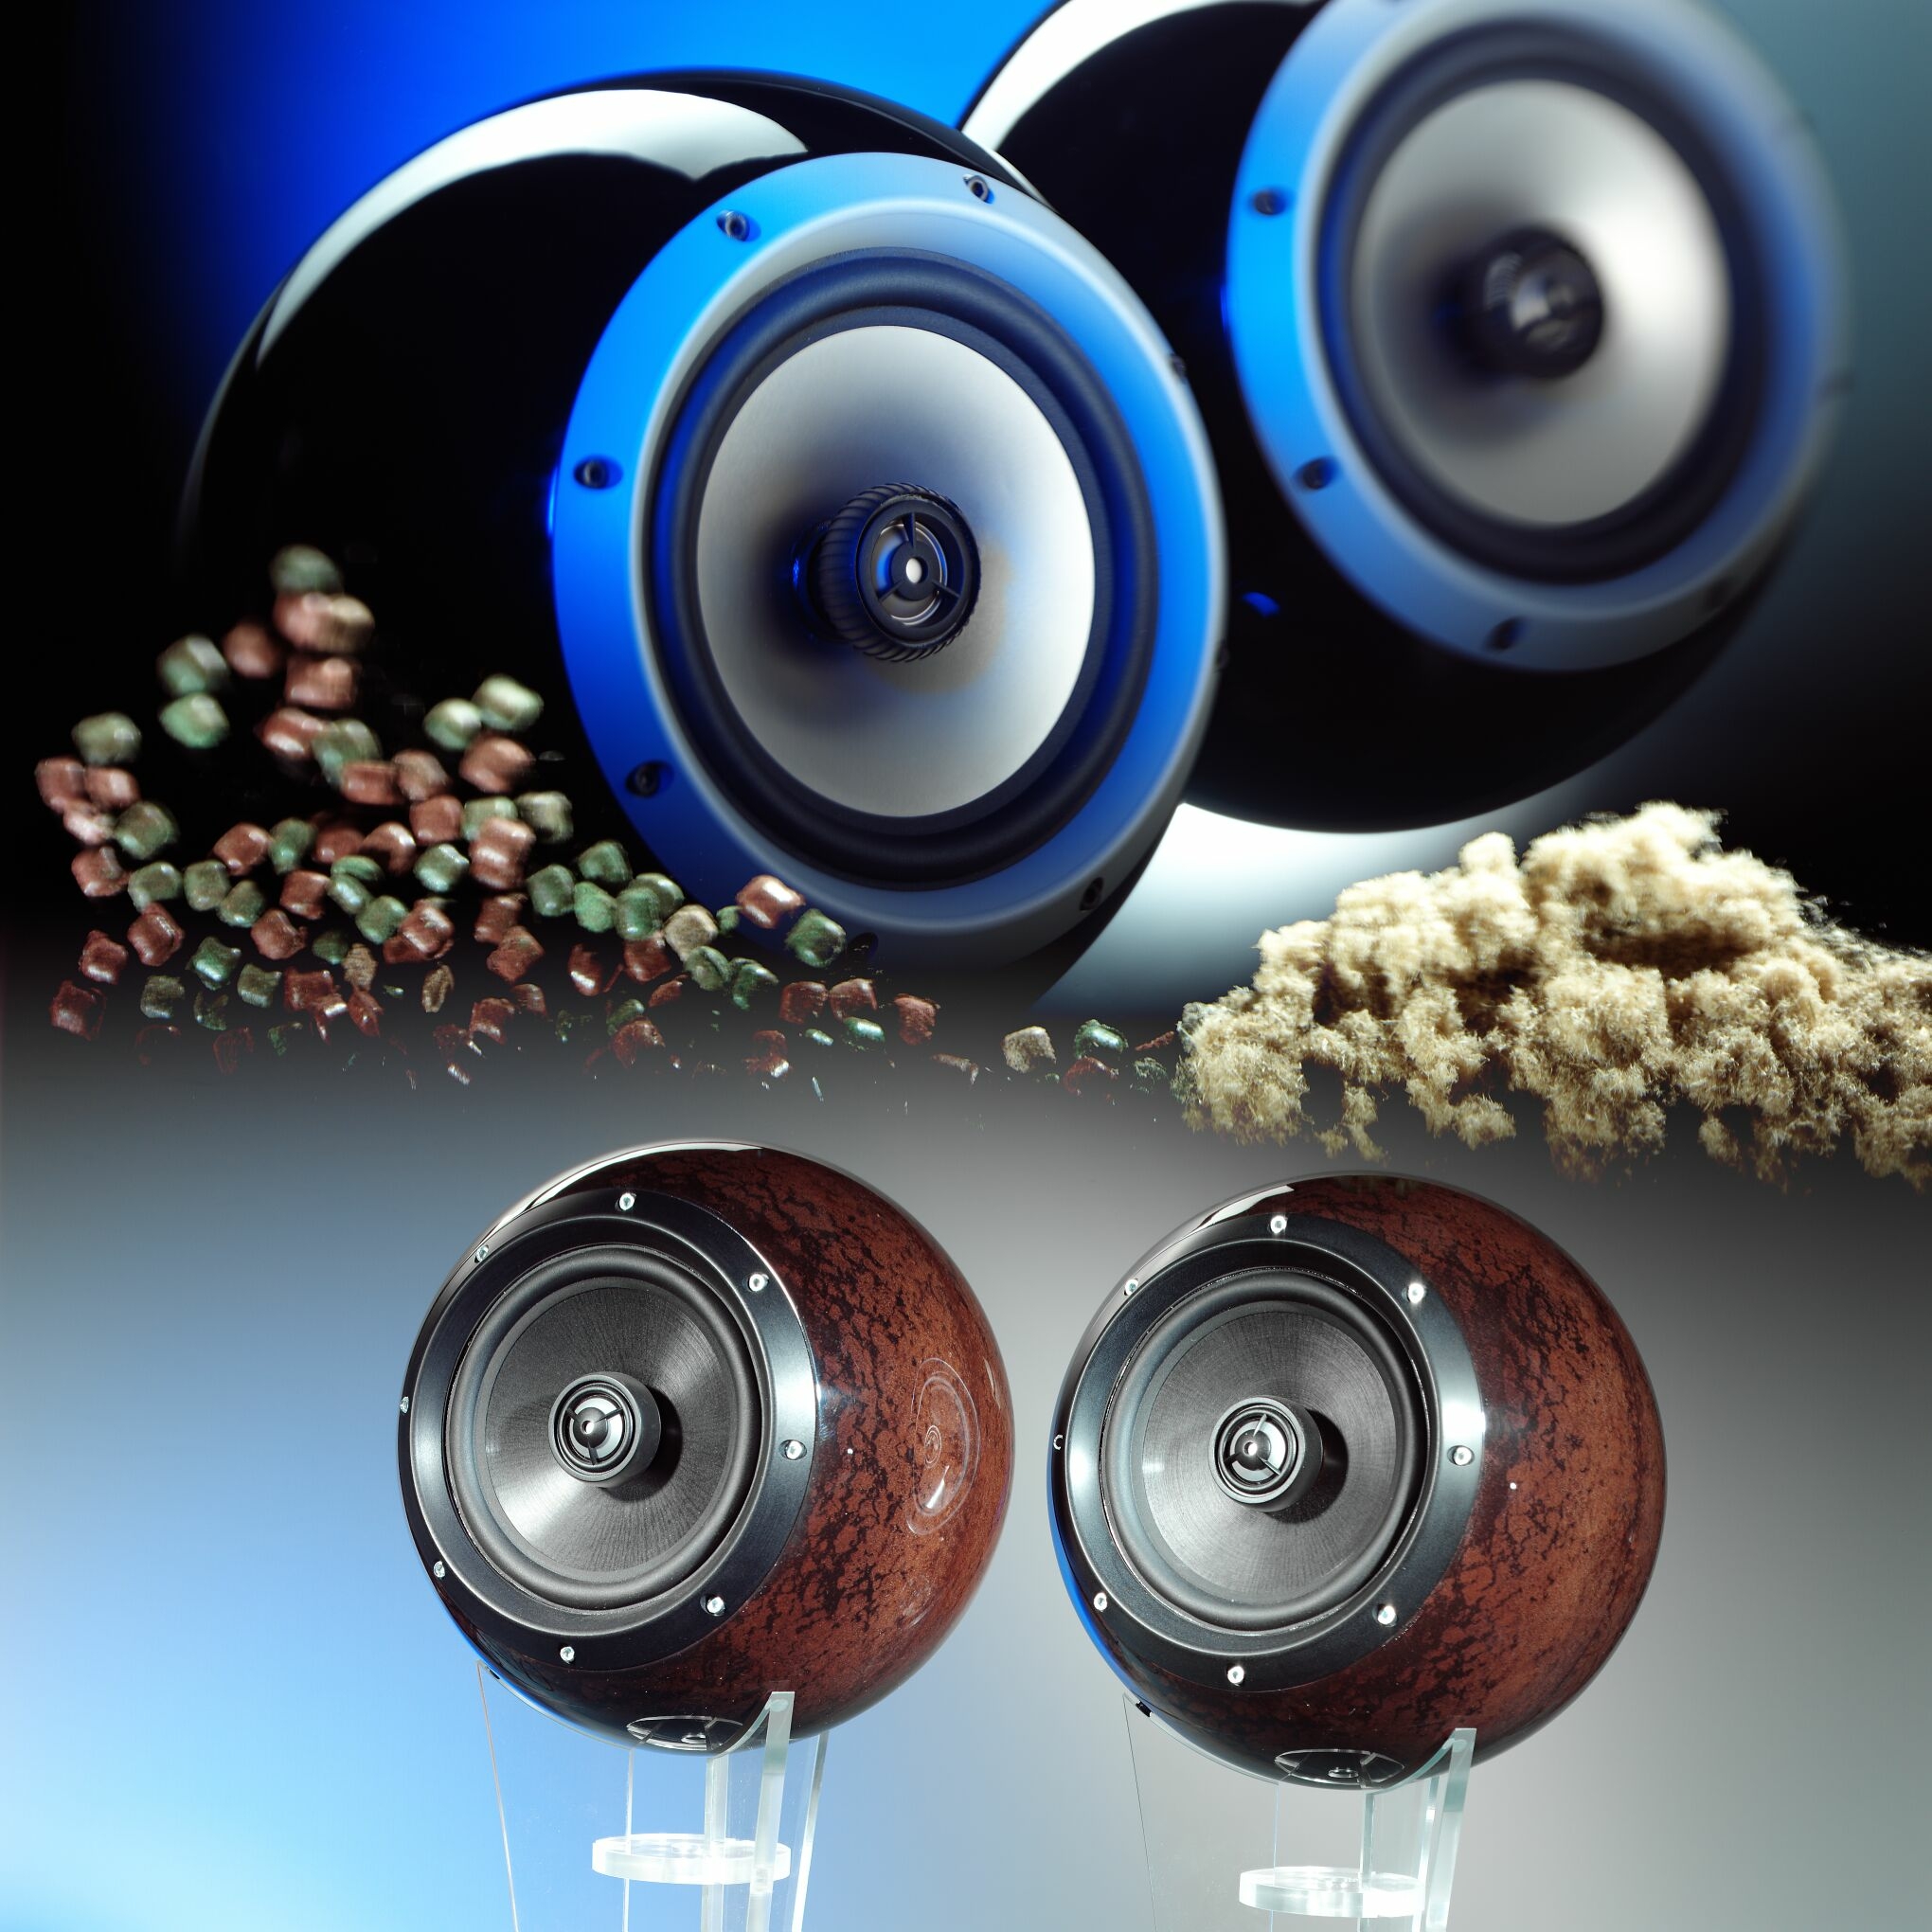 ARBOFORM, a sustainable thermoplastic material based on wood, is used for the production of spherical loudspeakers. (Photo: Tecnaro GmbH)